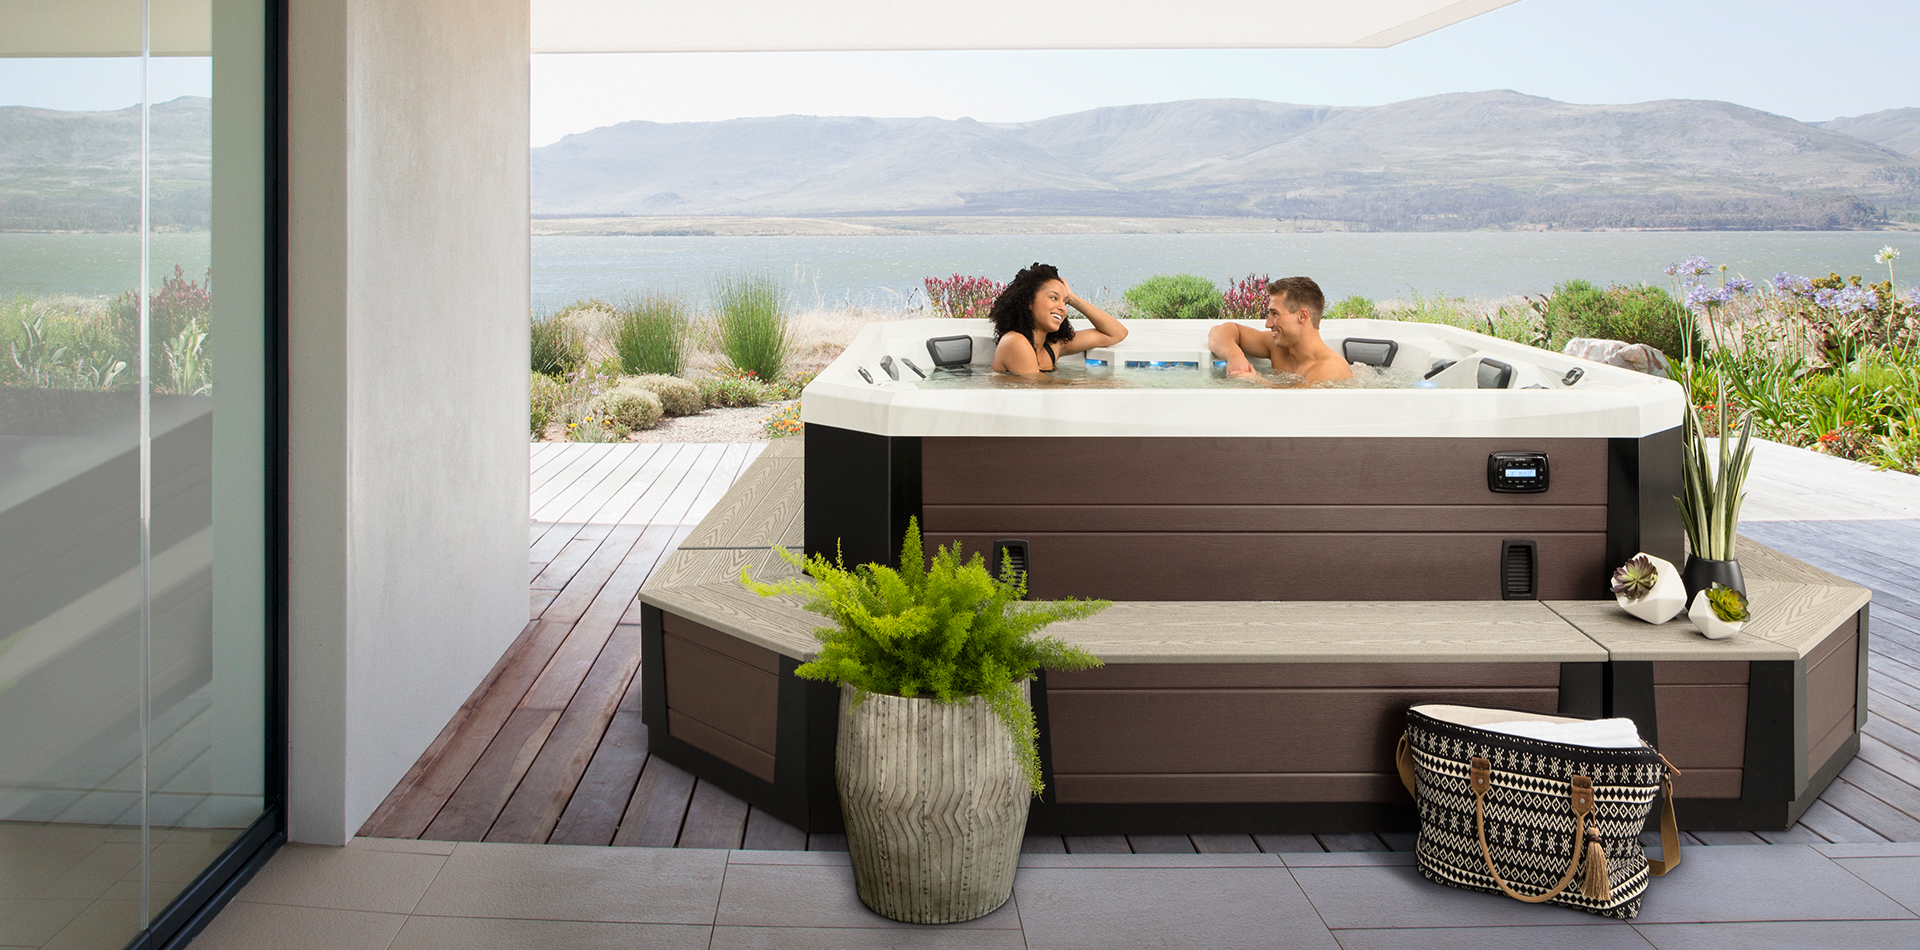 How Big Is A 8 Person Hot Tub - BEST HOME DESIGN IDEAS